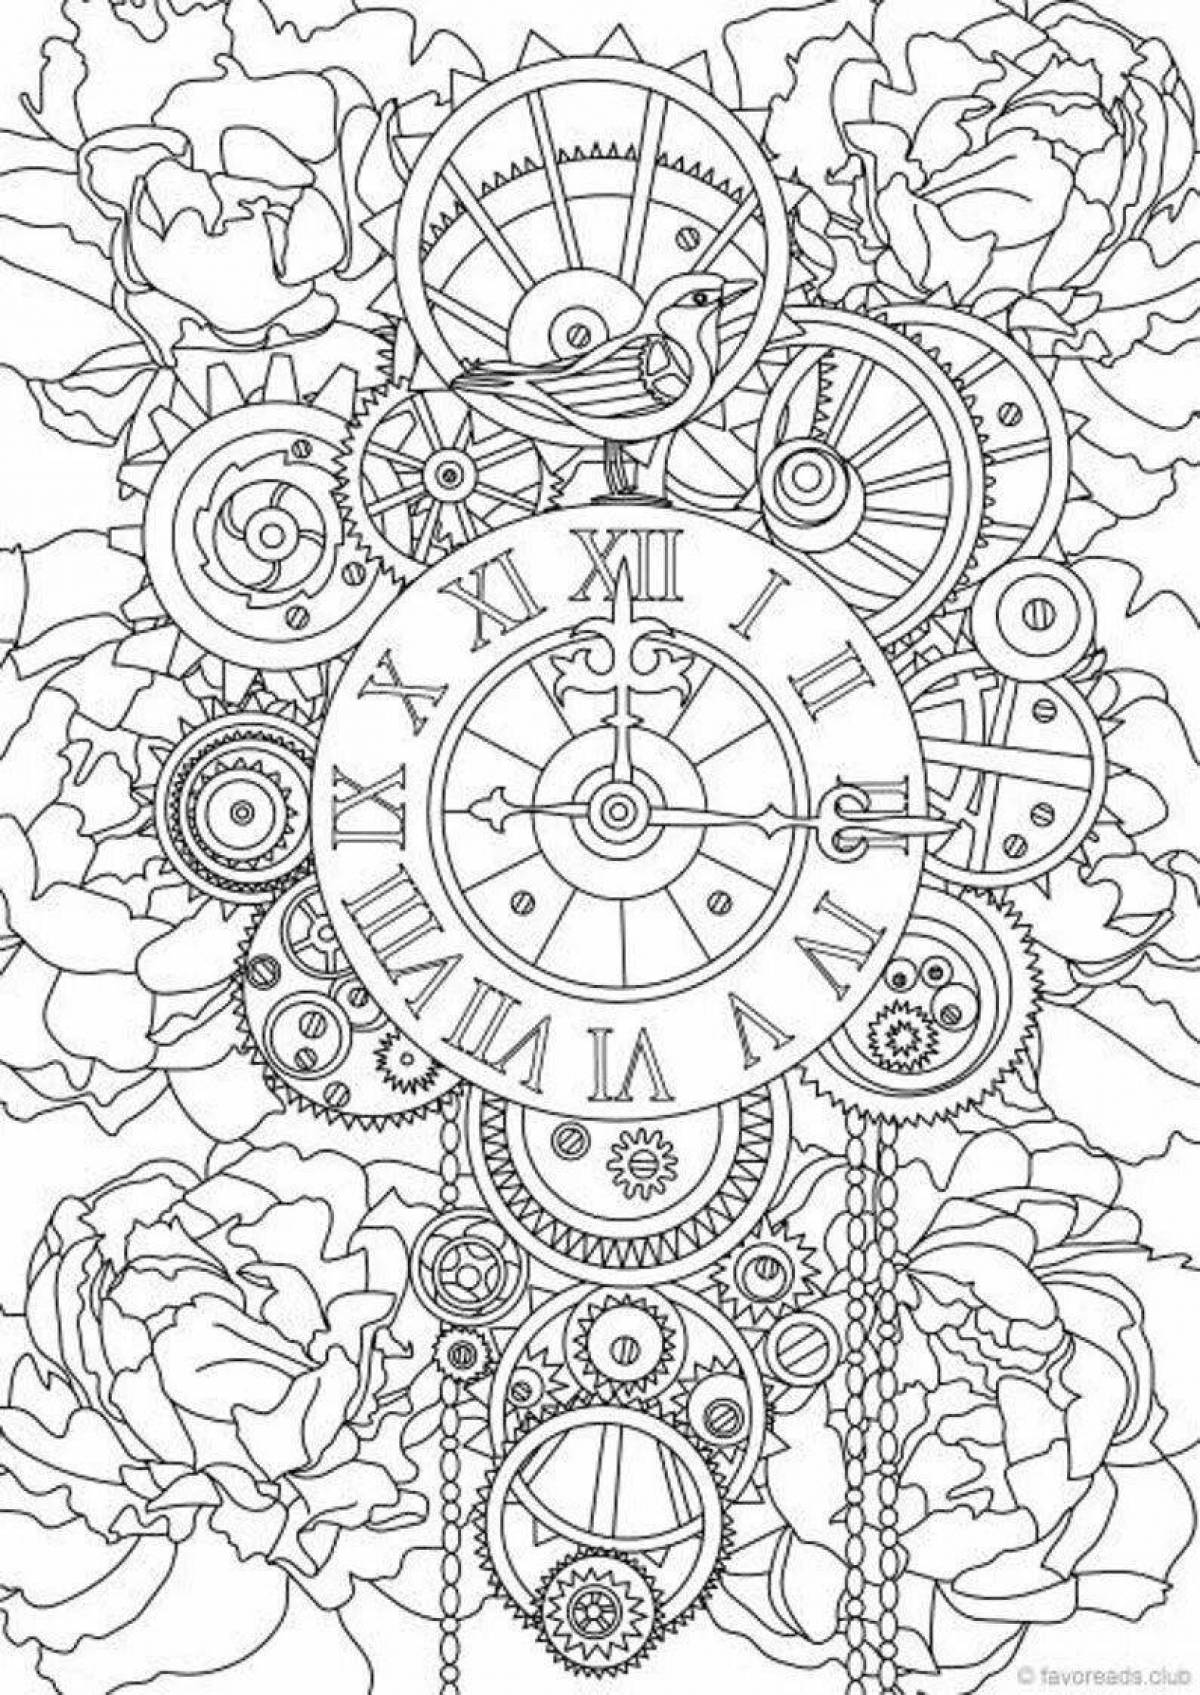 Steampunk coloring book